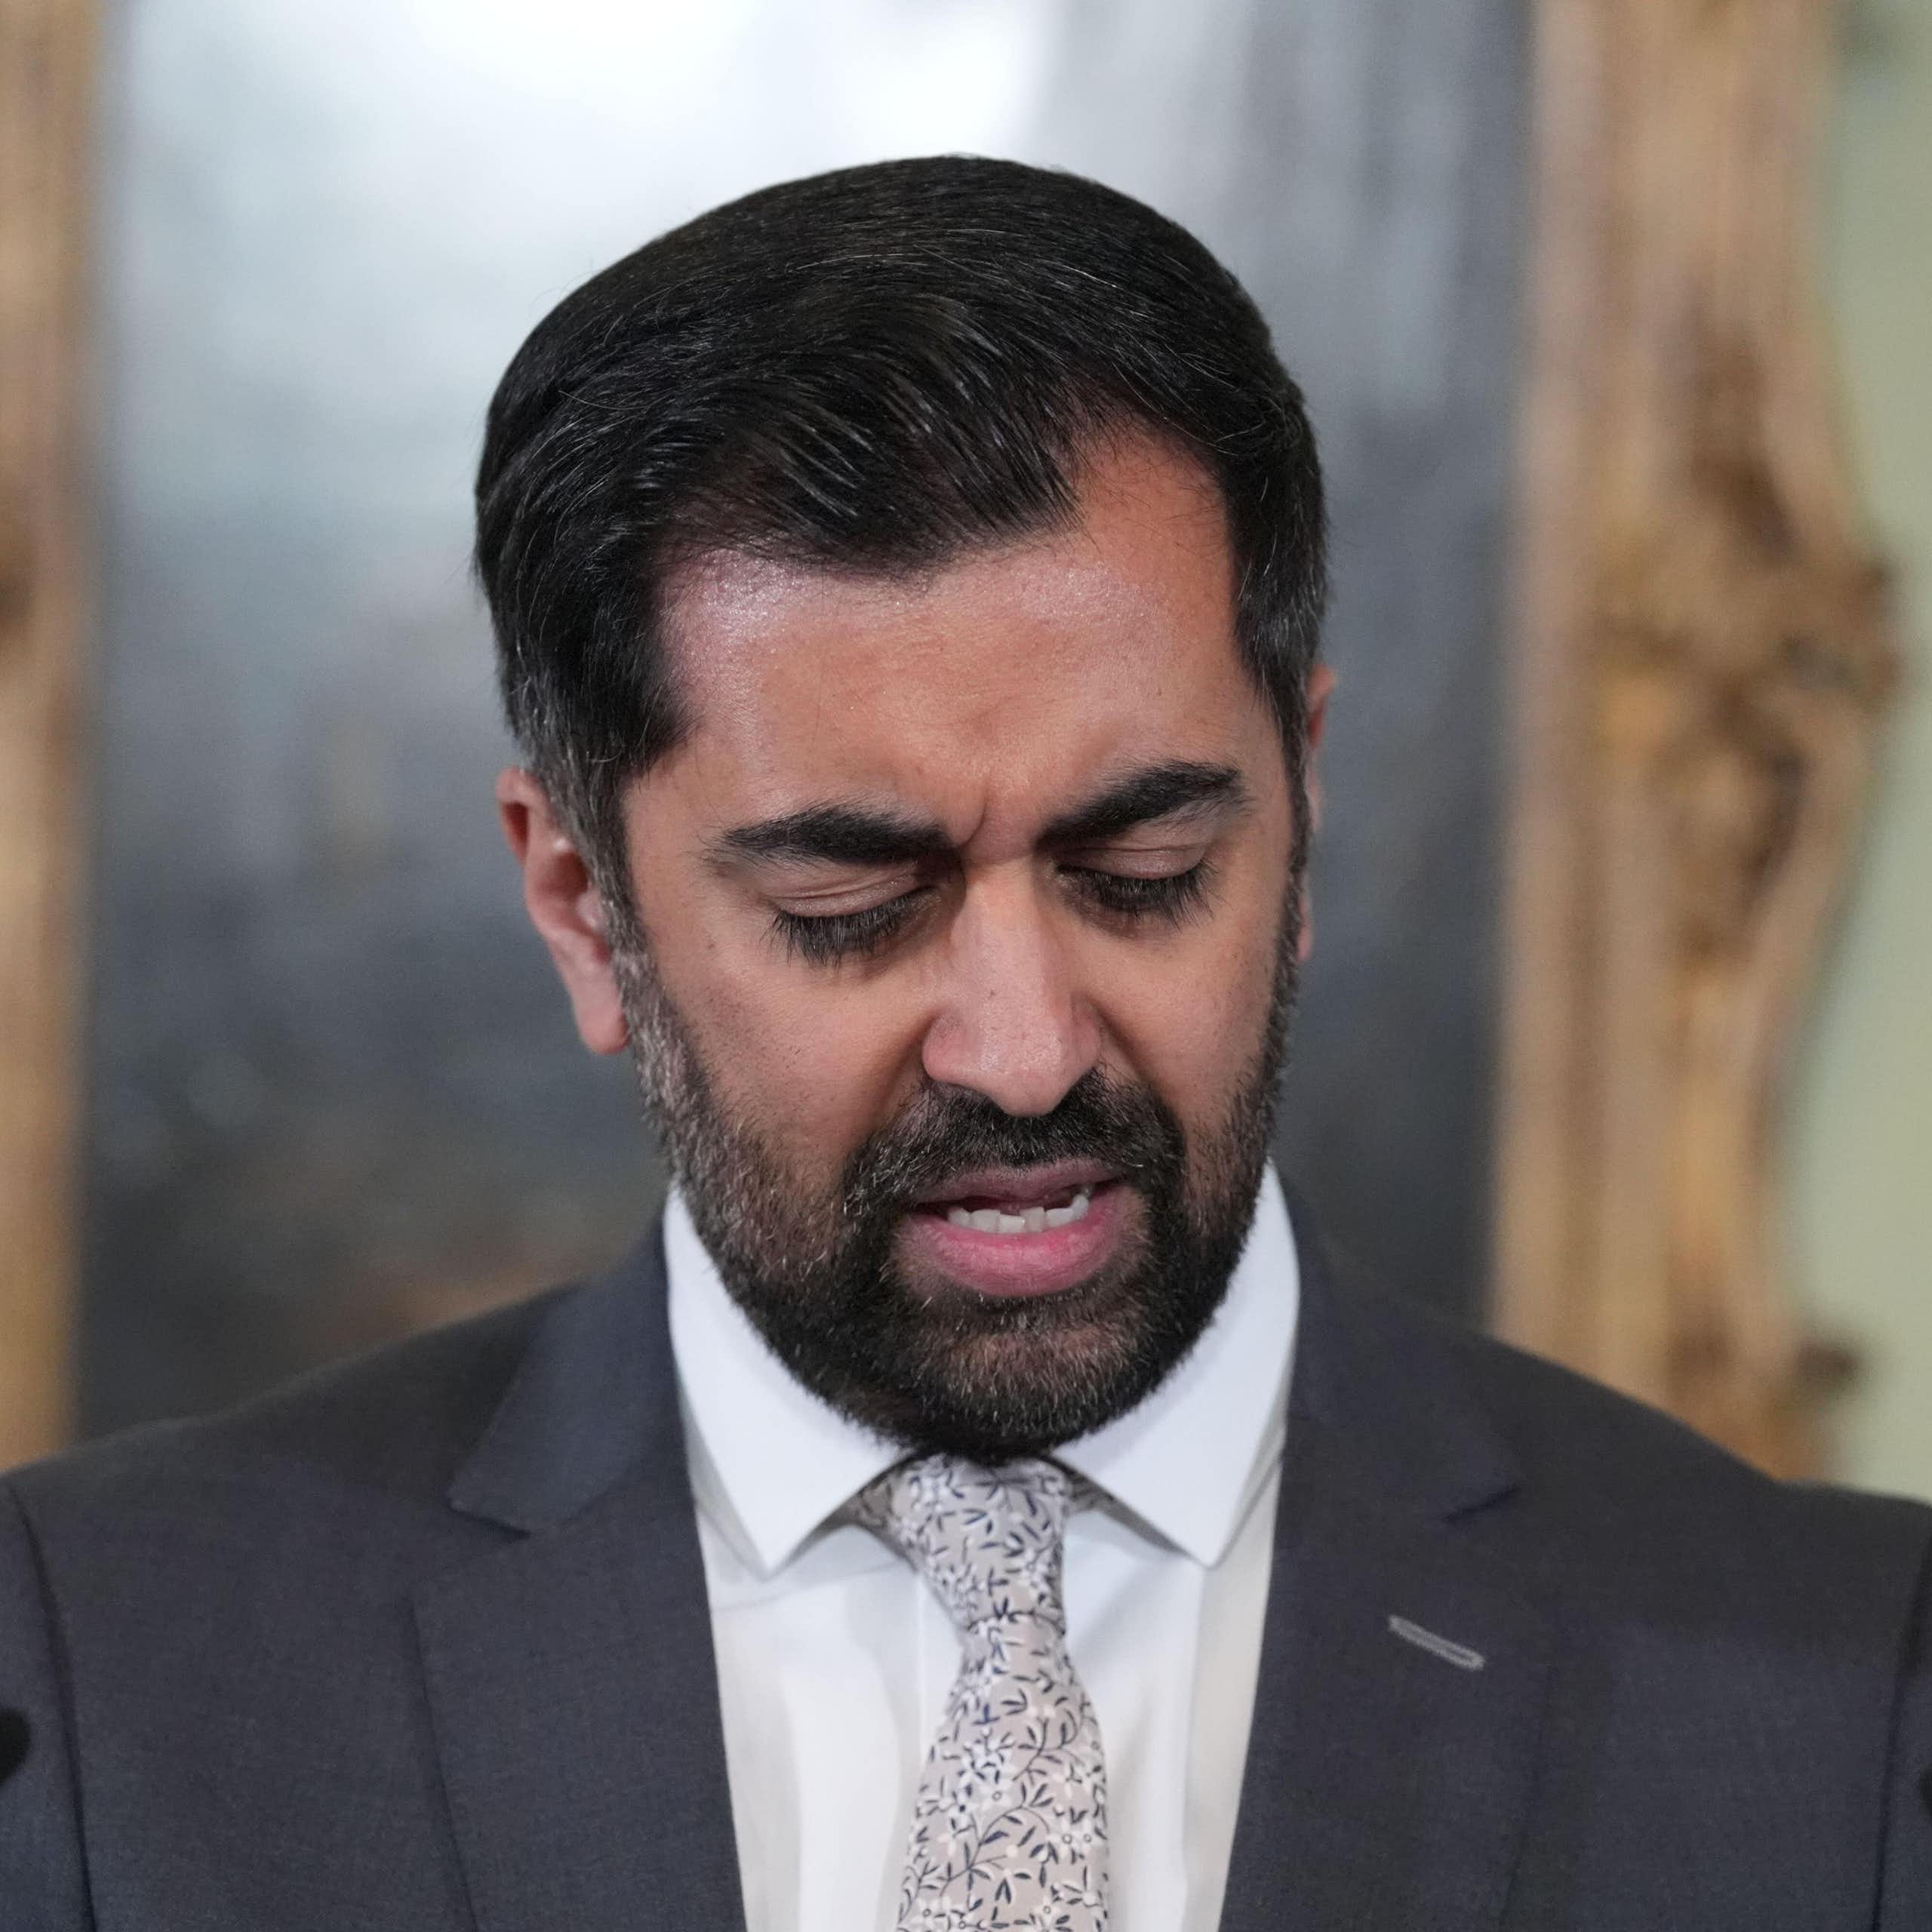 Humza Yousaf, Scotland’s departing first minister, and the art of the resignation speech